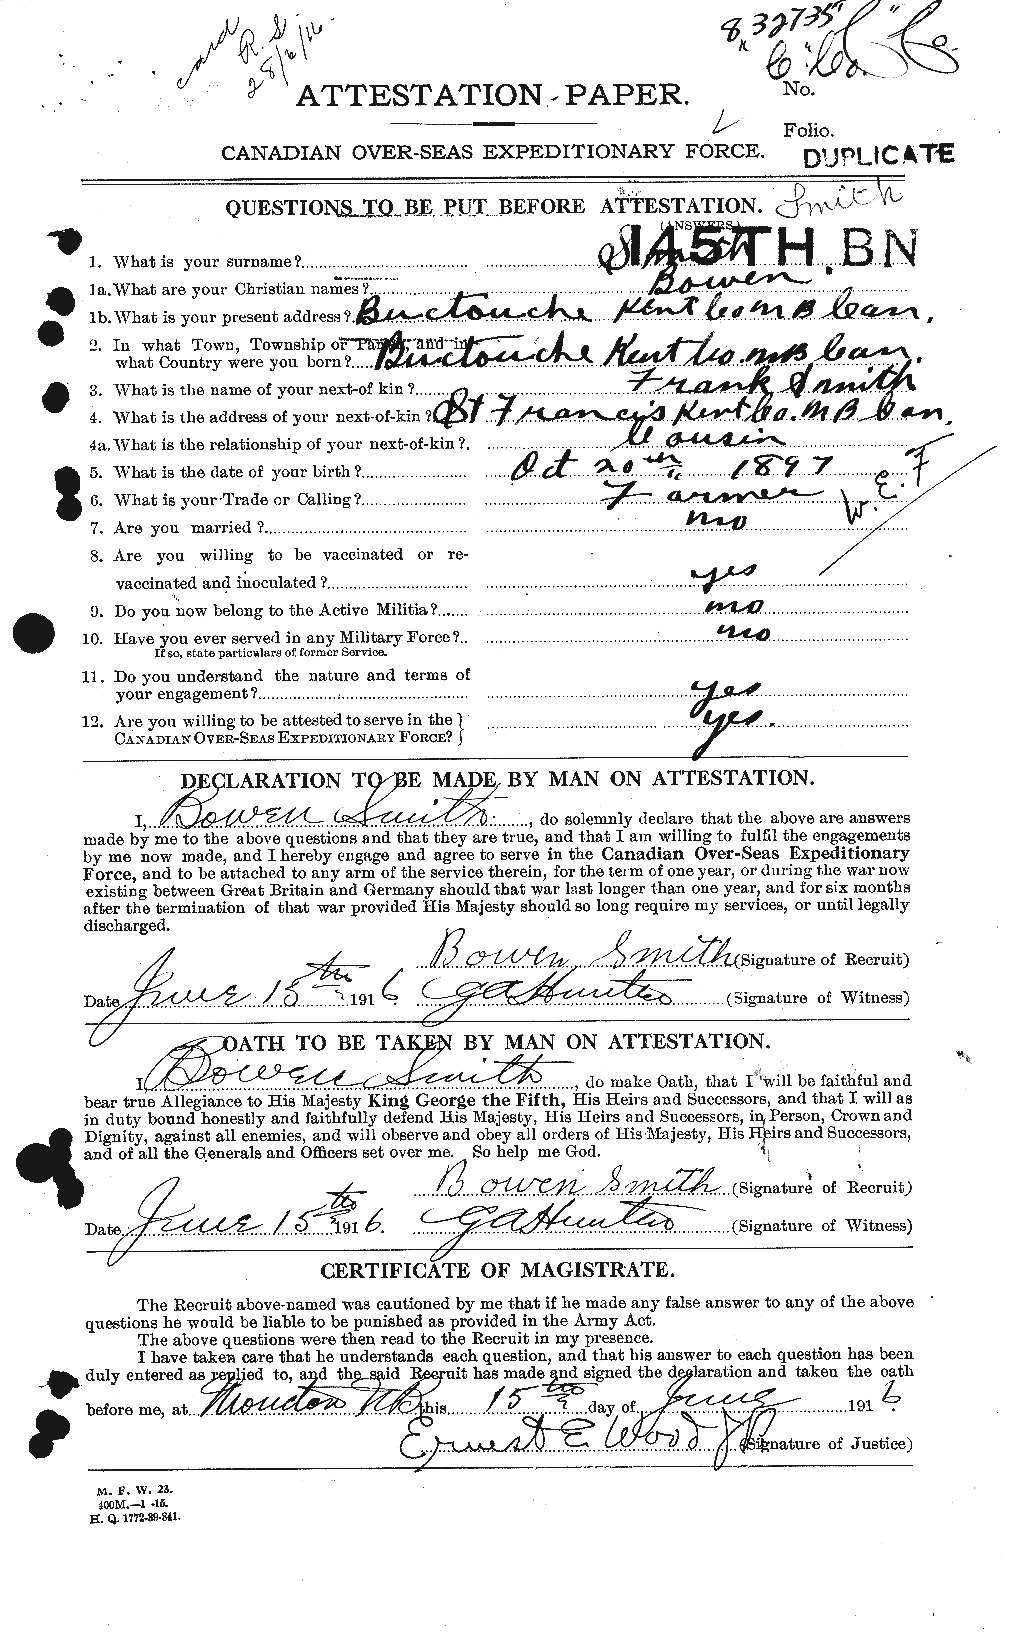 Personnel Records of the First World War - CEF 100834a